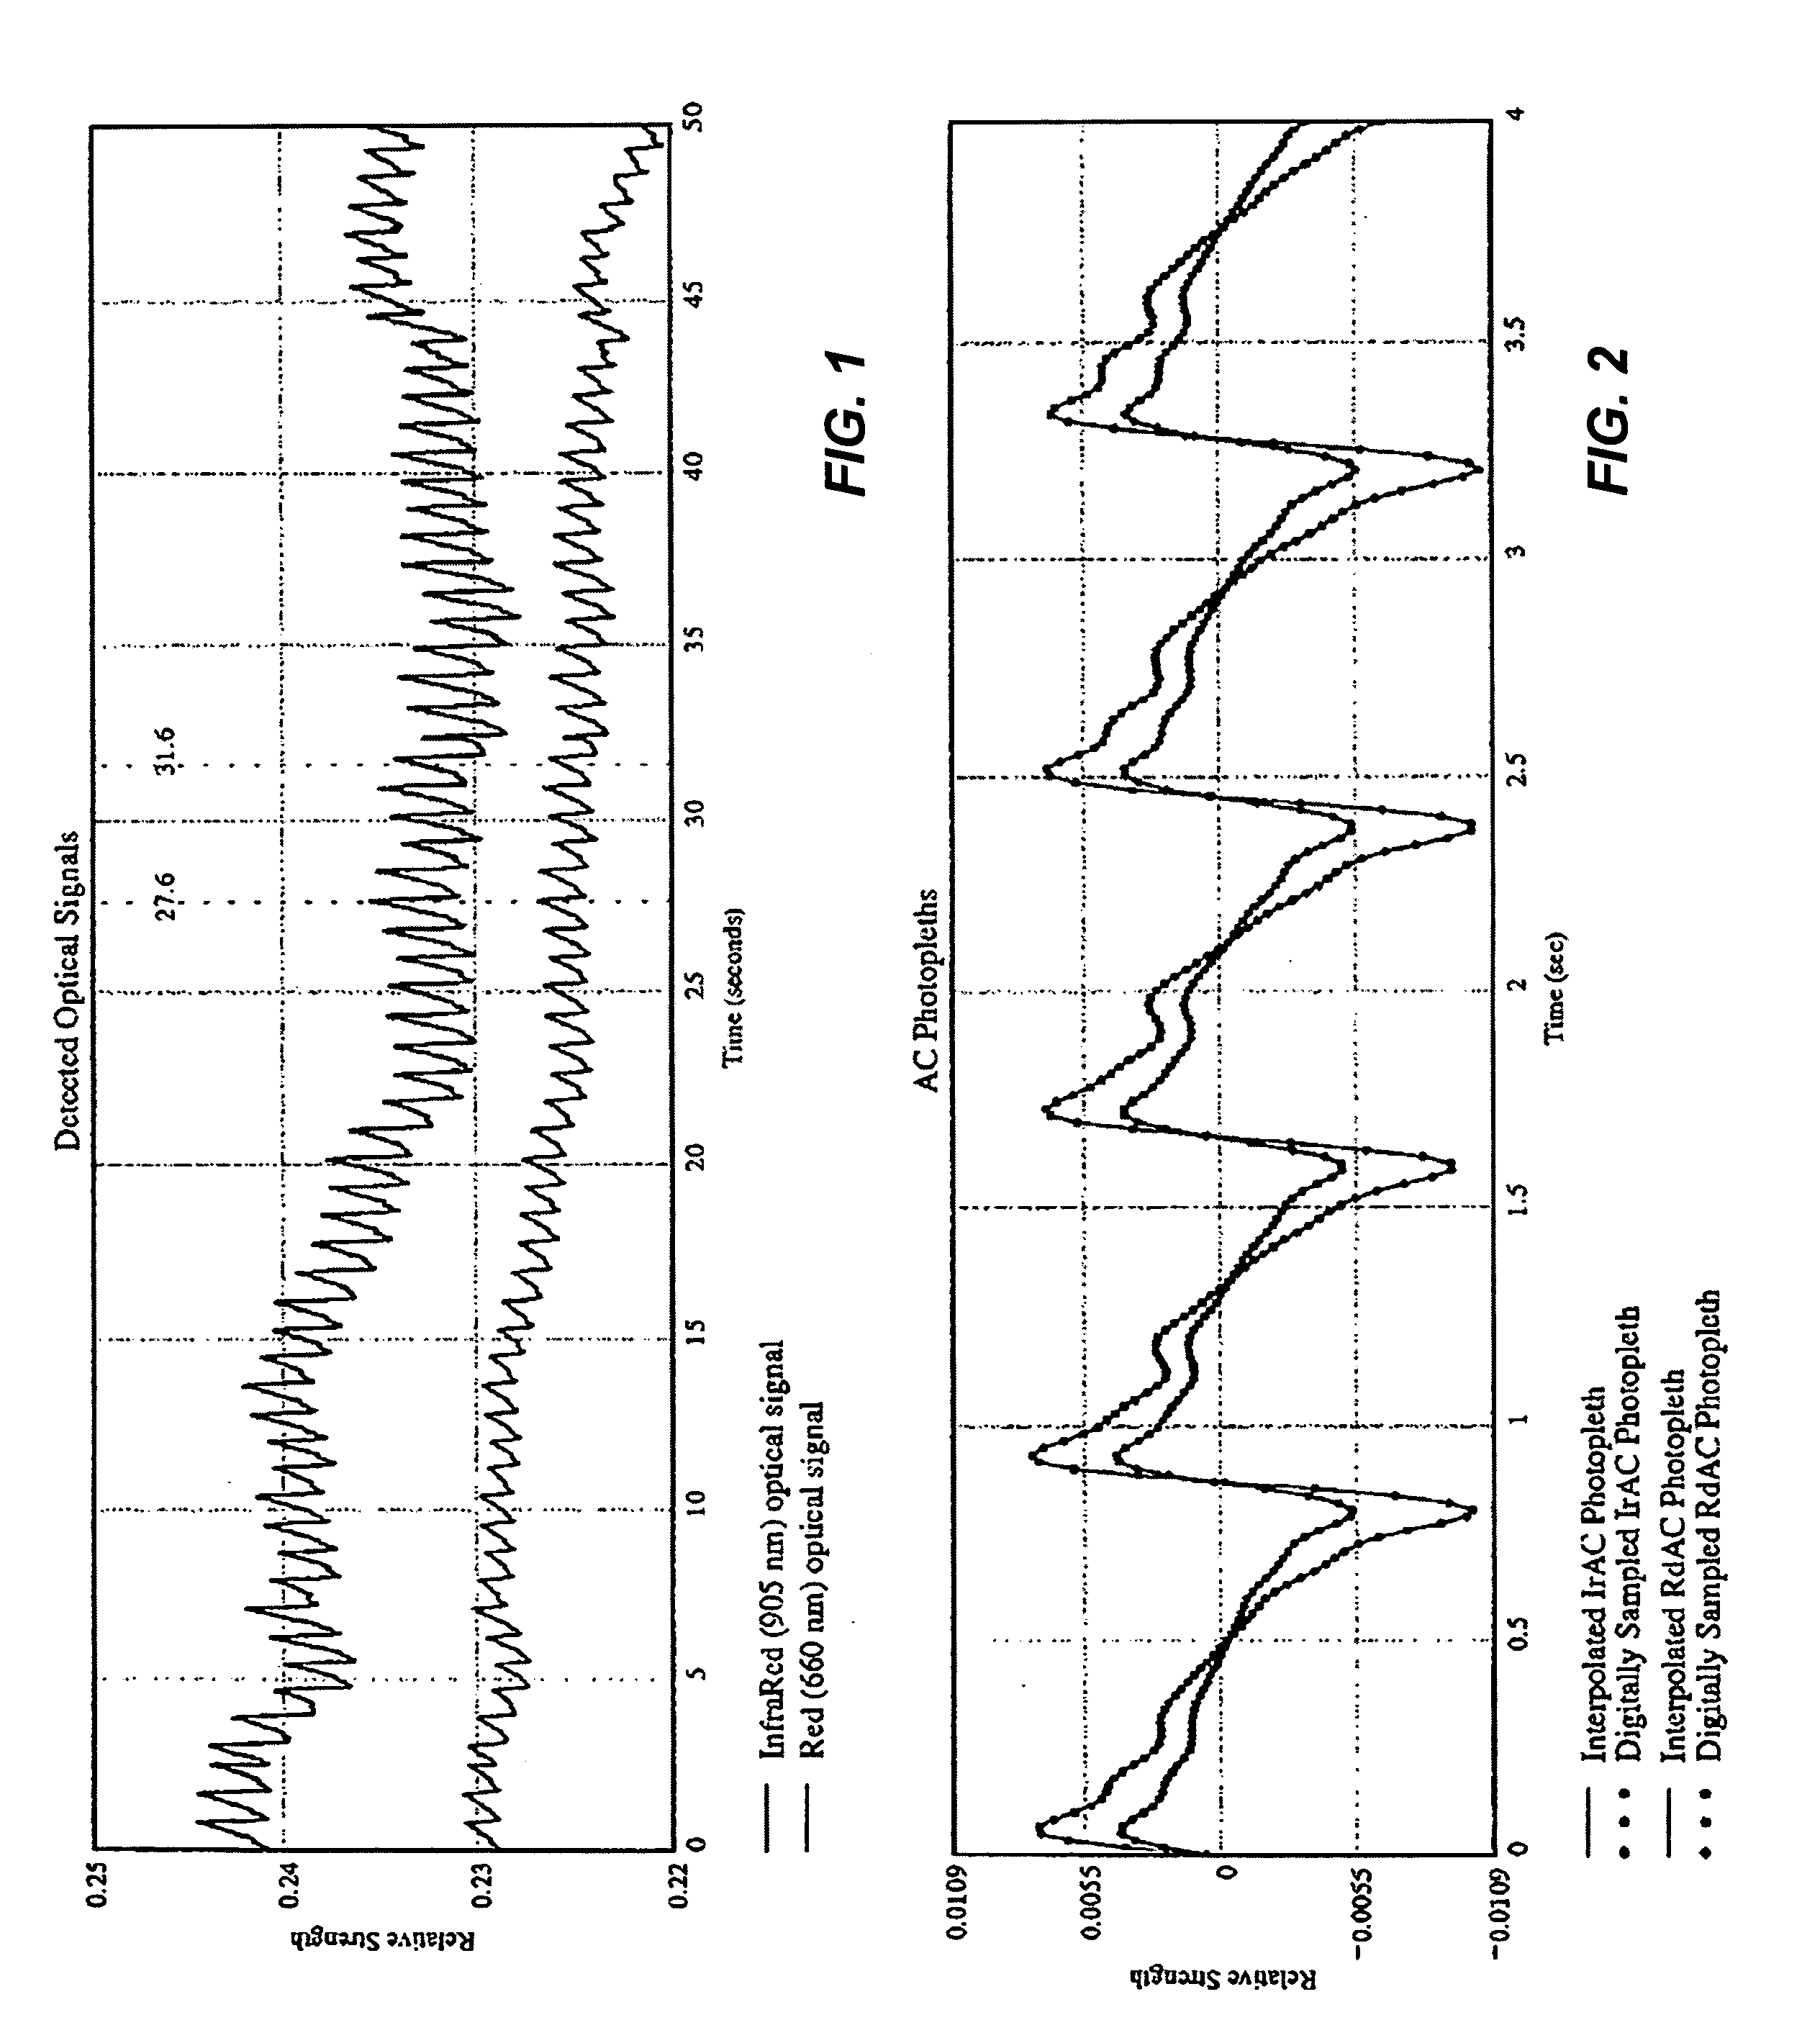 Systems and methods for determining blood oxygen saturation values using complex number encoding